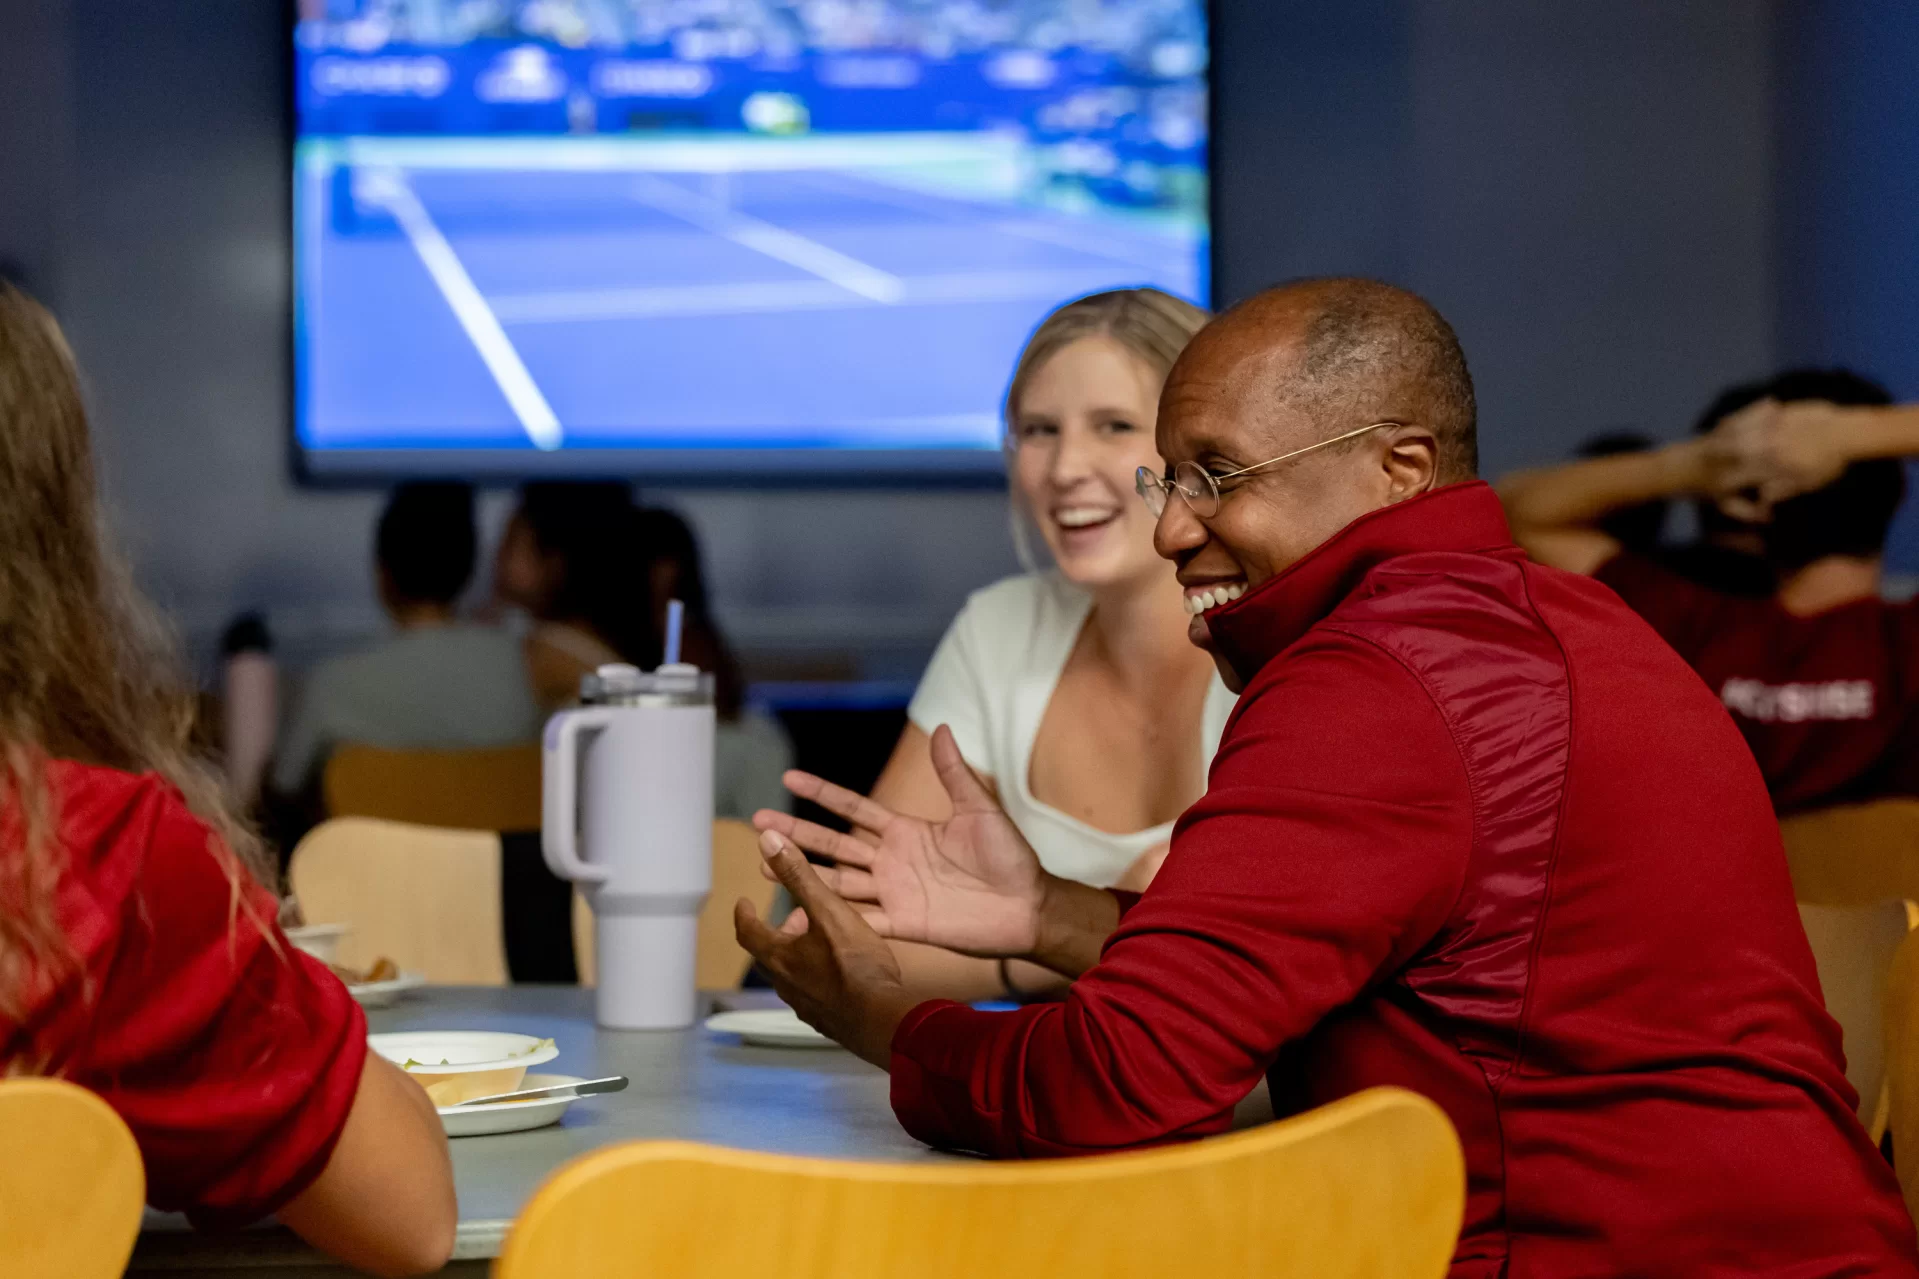 Men’s and Women’s Tennis teams with Coach Paul Gastonguay have a U.S. Open Watch Party, attended by President Garry W. Jenkins who is a tennis player, and faculty tennis liaison Aleks Diamond-Stanic,